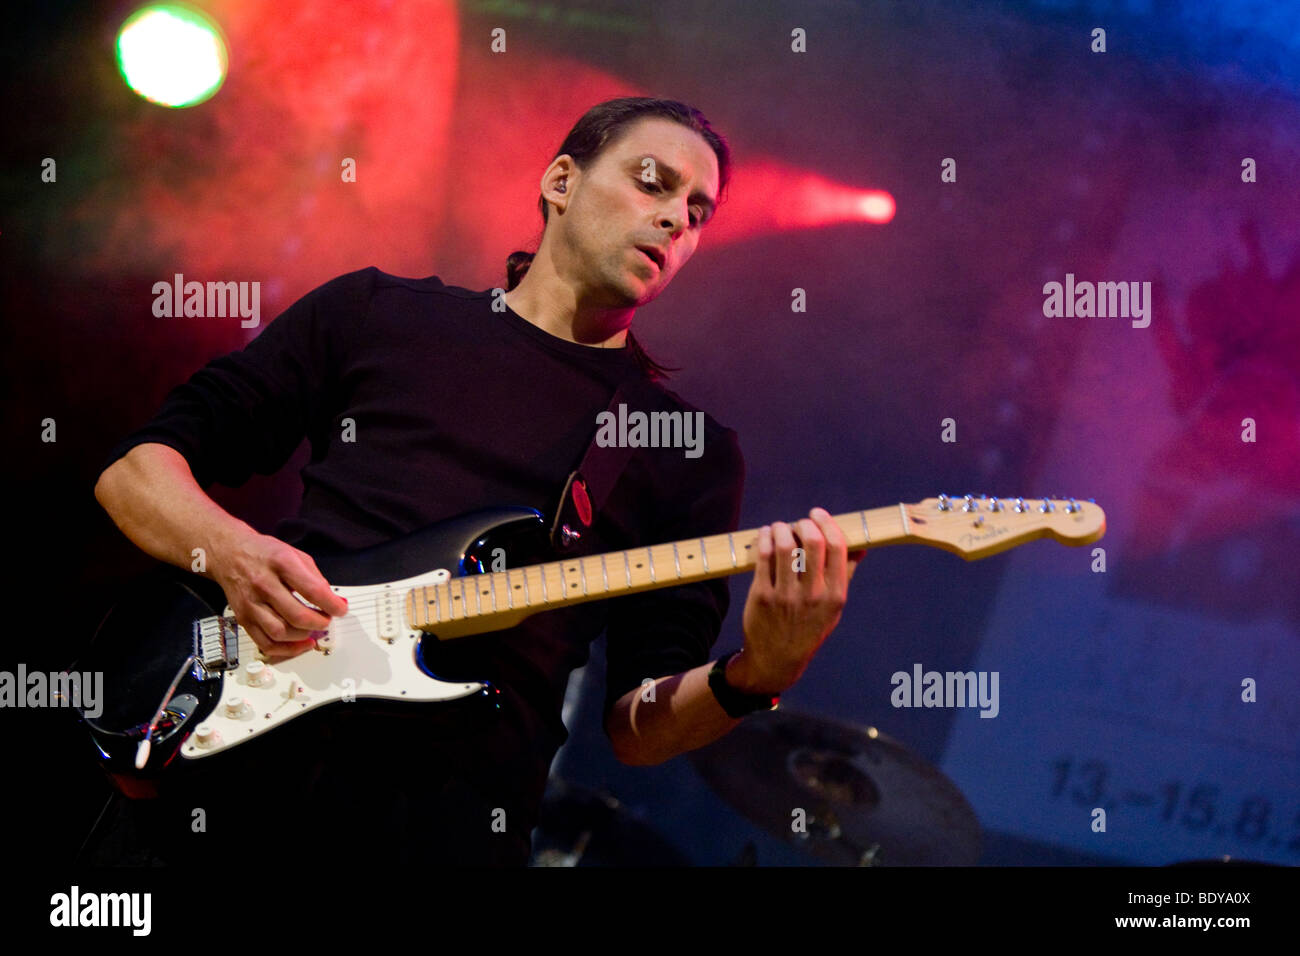 Uese Junger, singer and front man of the Swiss band Pink Floyd Crazy Diamond live at the Autlook festival in Schenkon, Lucerne, Stock Photo